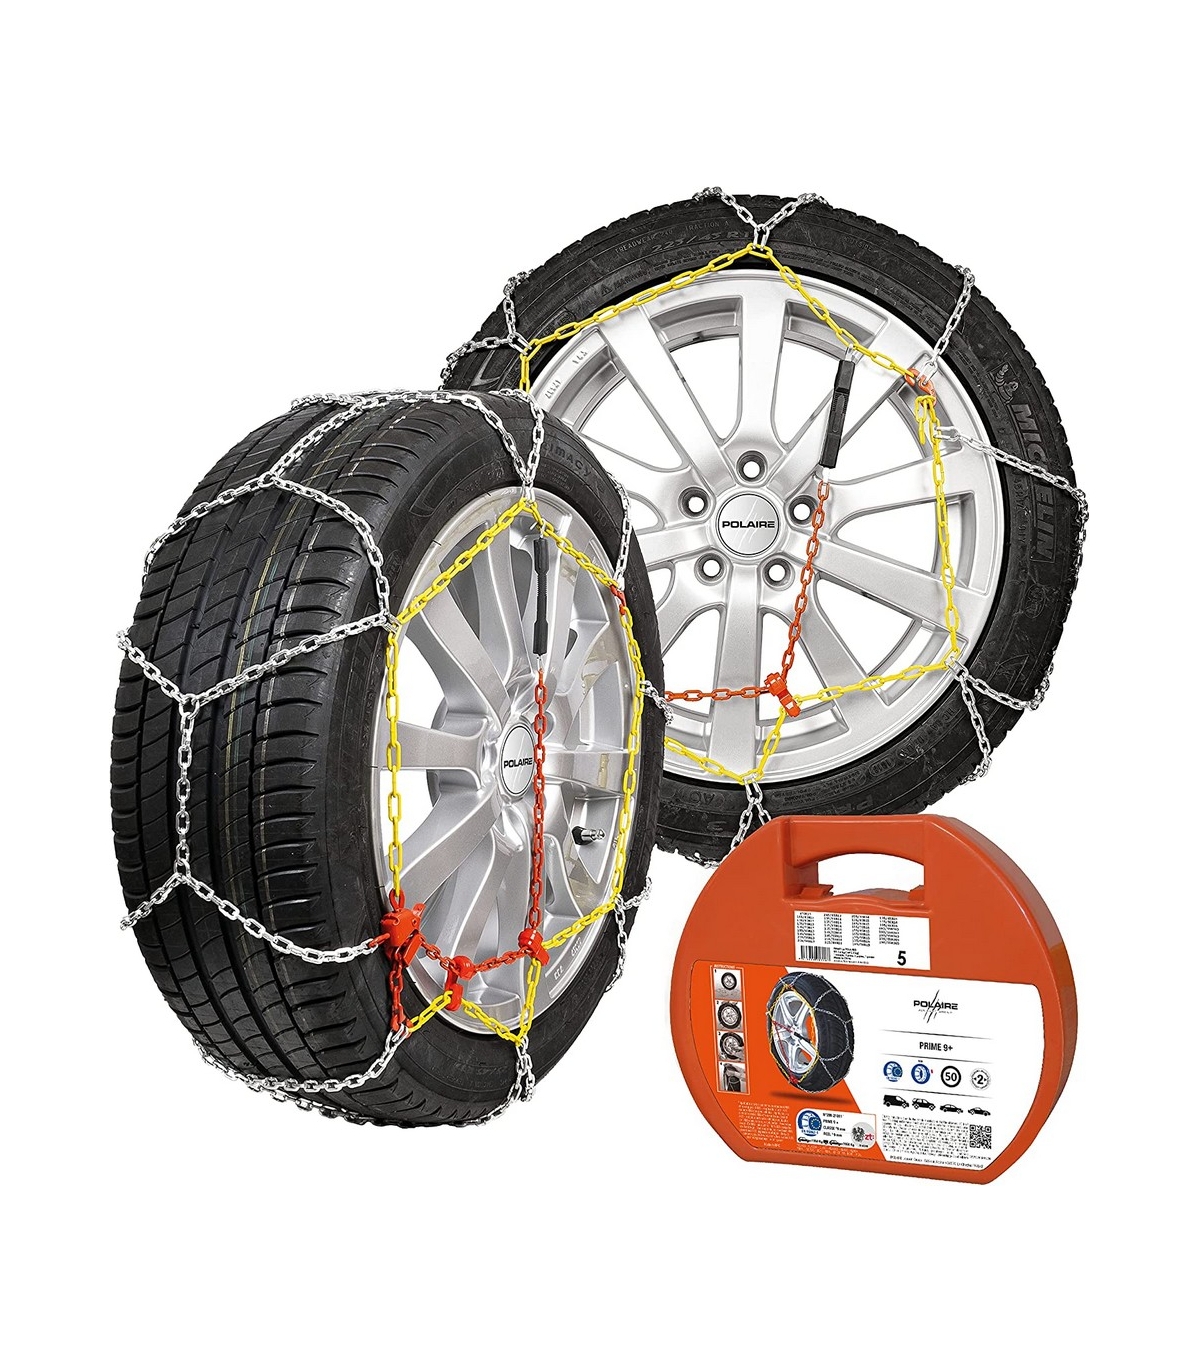 Chaines neige 215/55R17, 215/60R17, 215/65R16, 225/55R17, 235